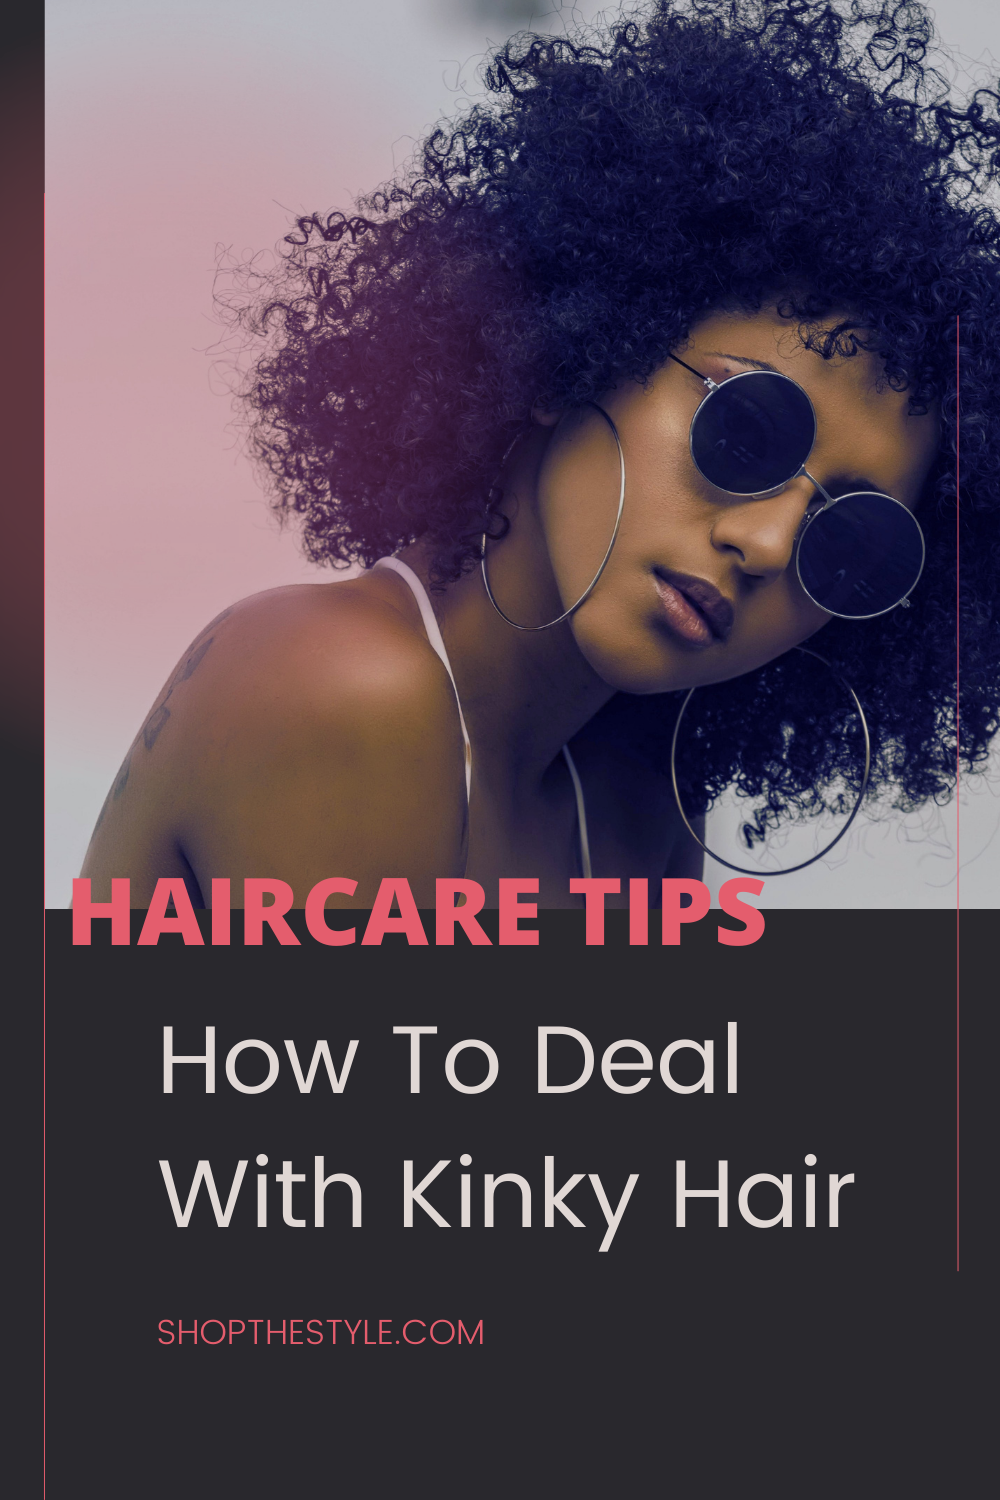 How To Deal With Kinky Hair